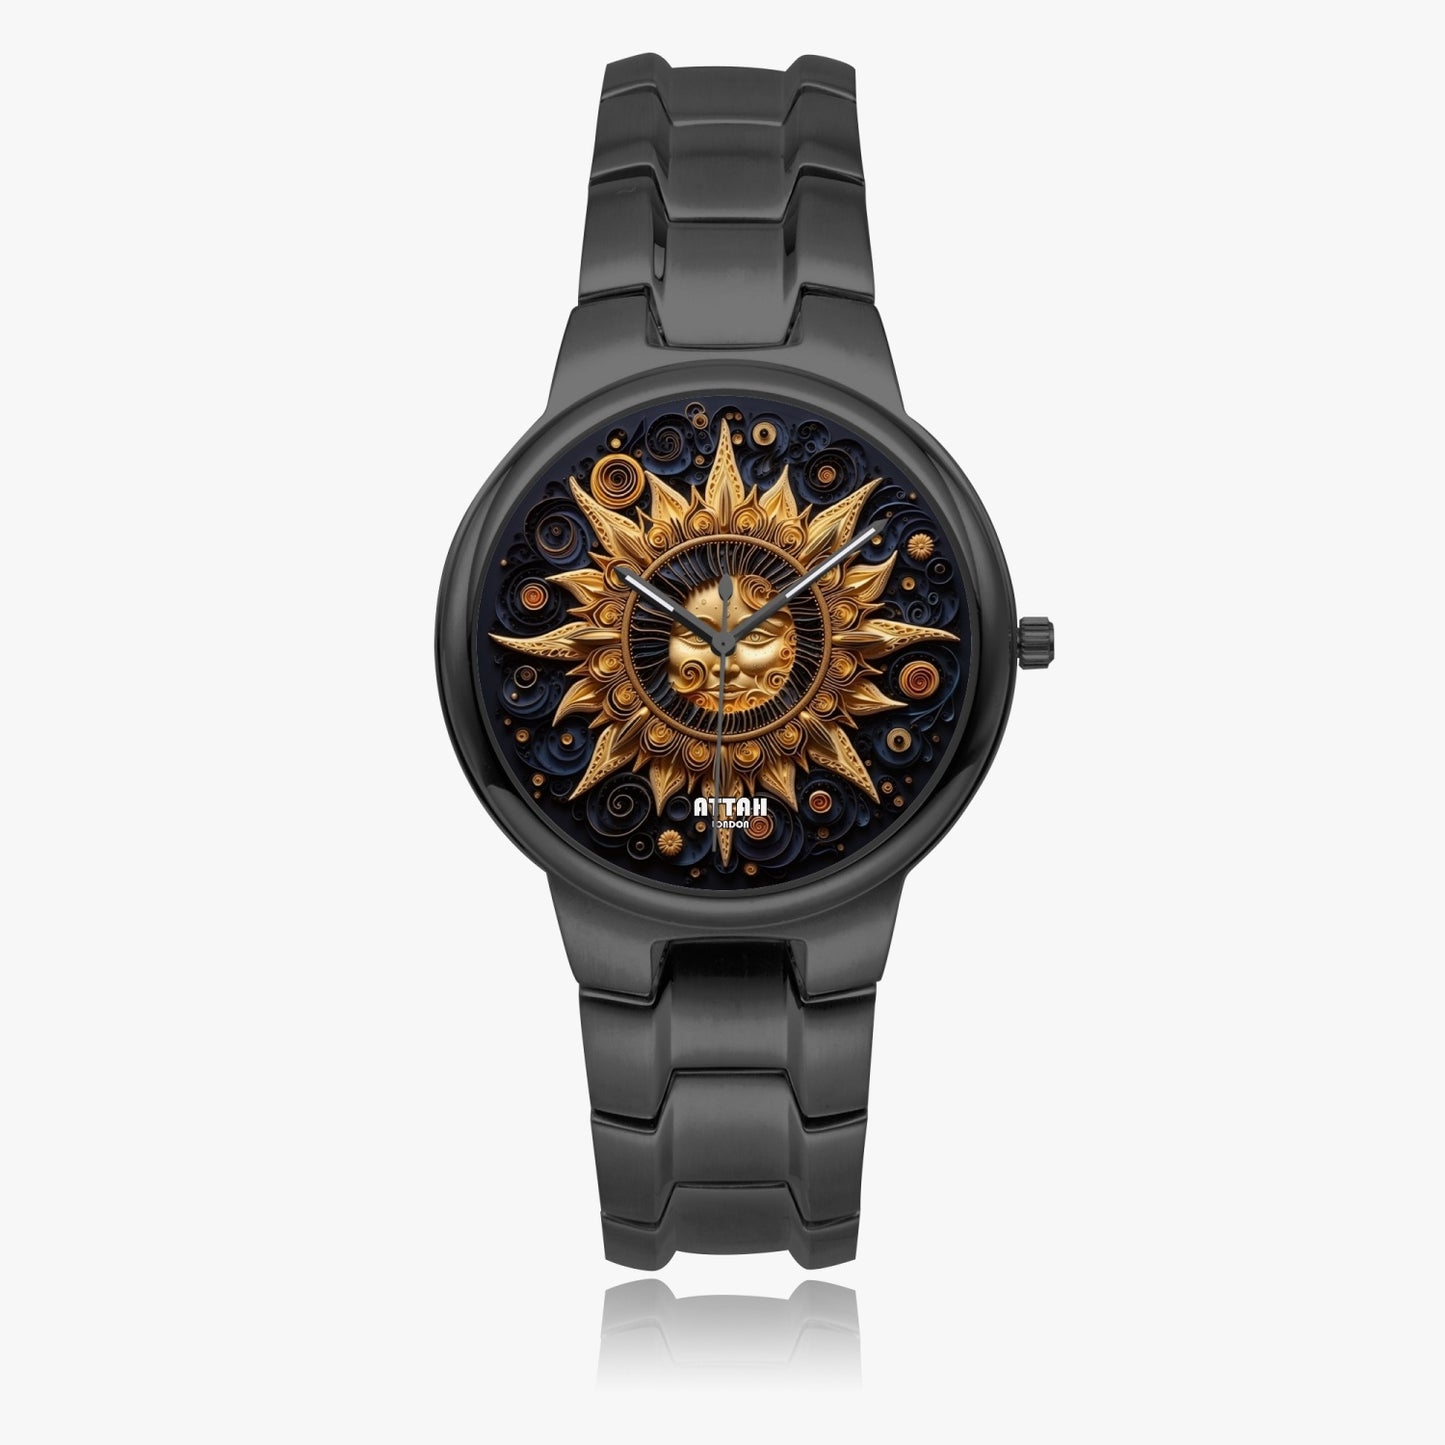 The Eclipse Watch